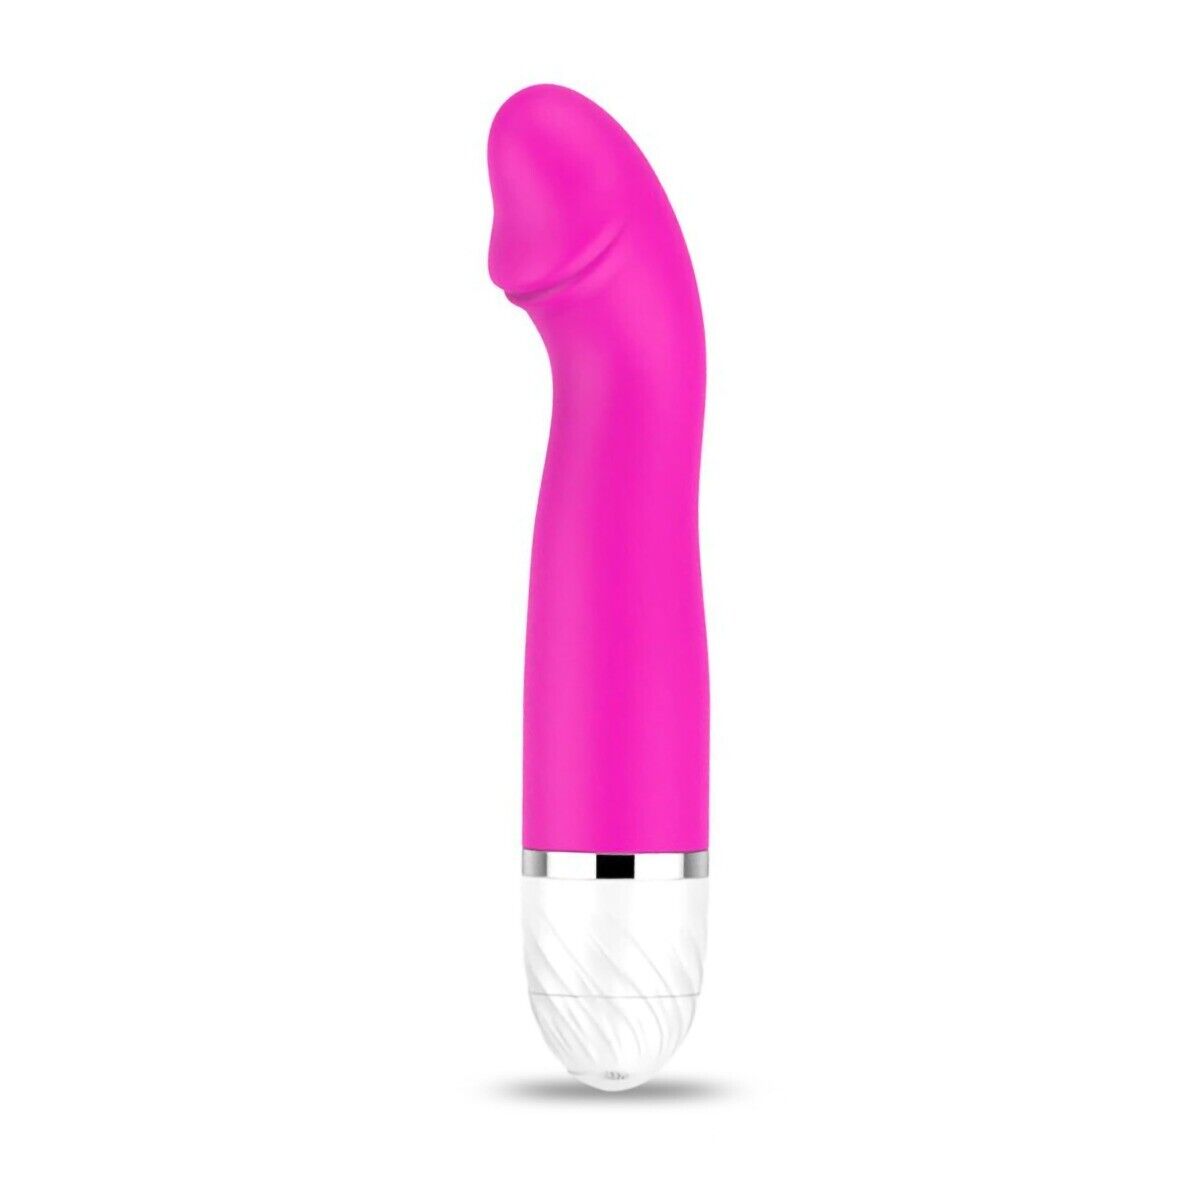 Silicone Flexible Realistic Anal Clit G-spot Vibrator Massager Sex Toy for Women